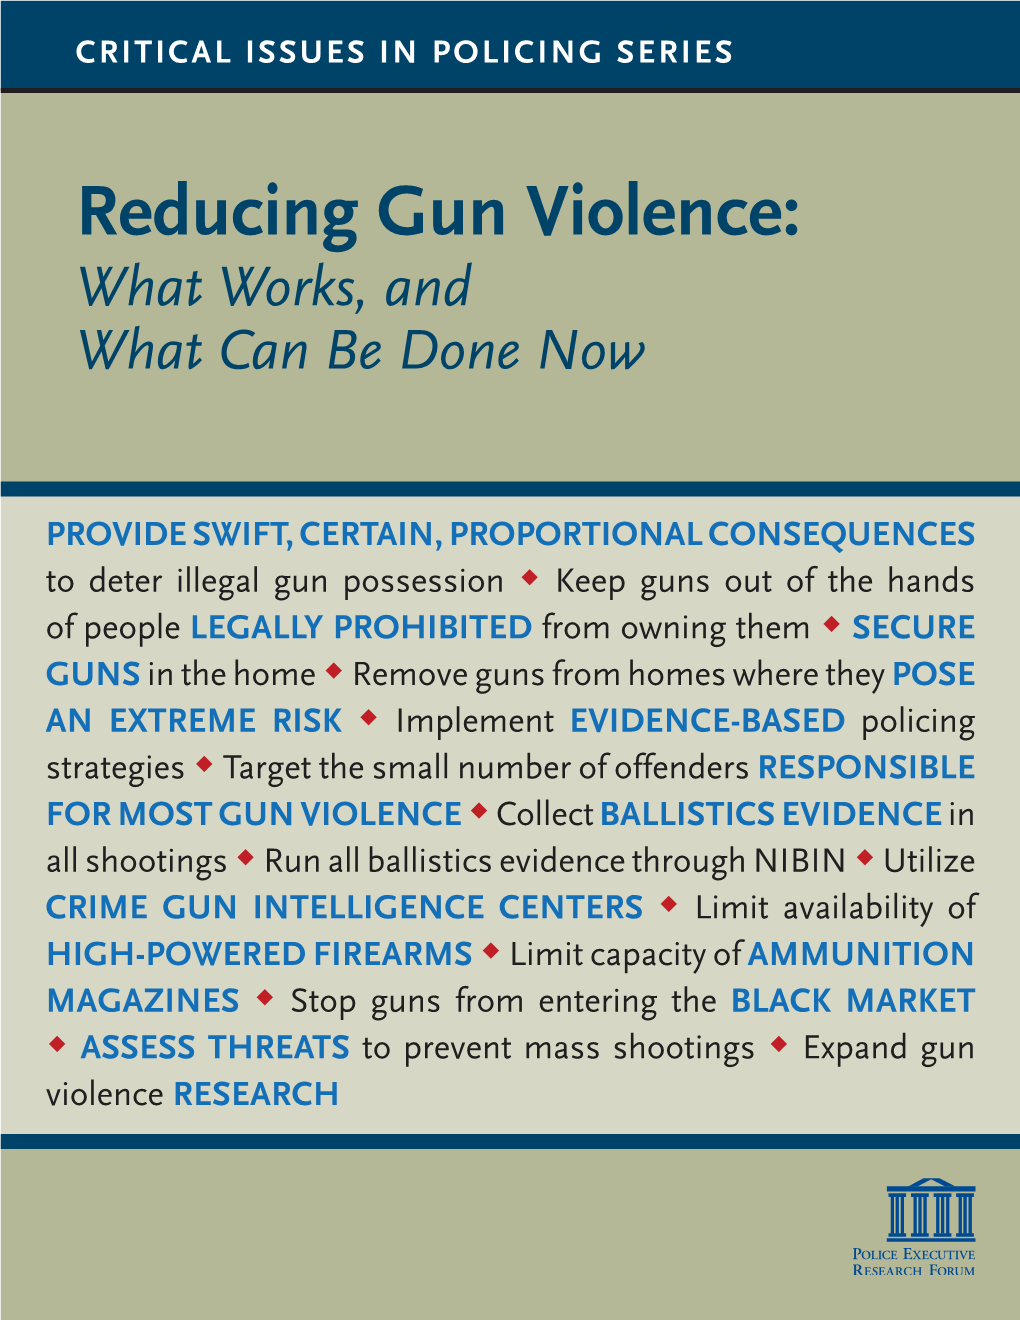 Reducing Gun Violence: What Works, and What Can Be Done Now